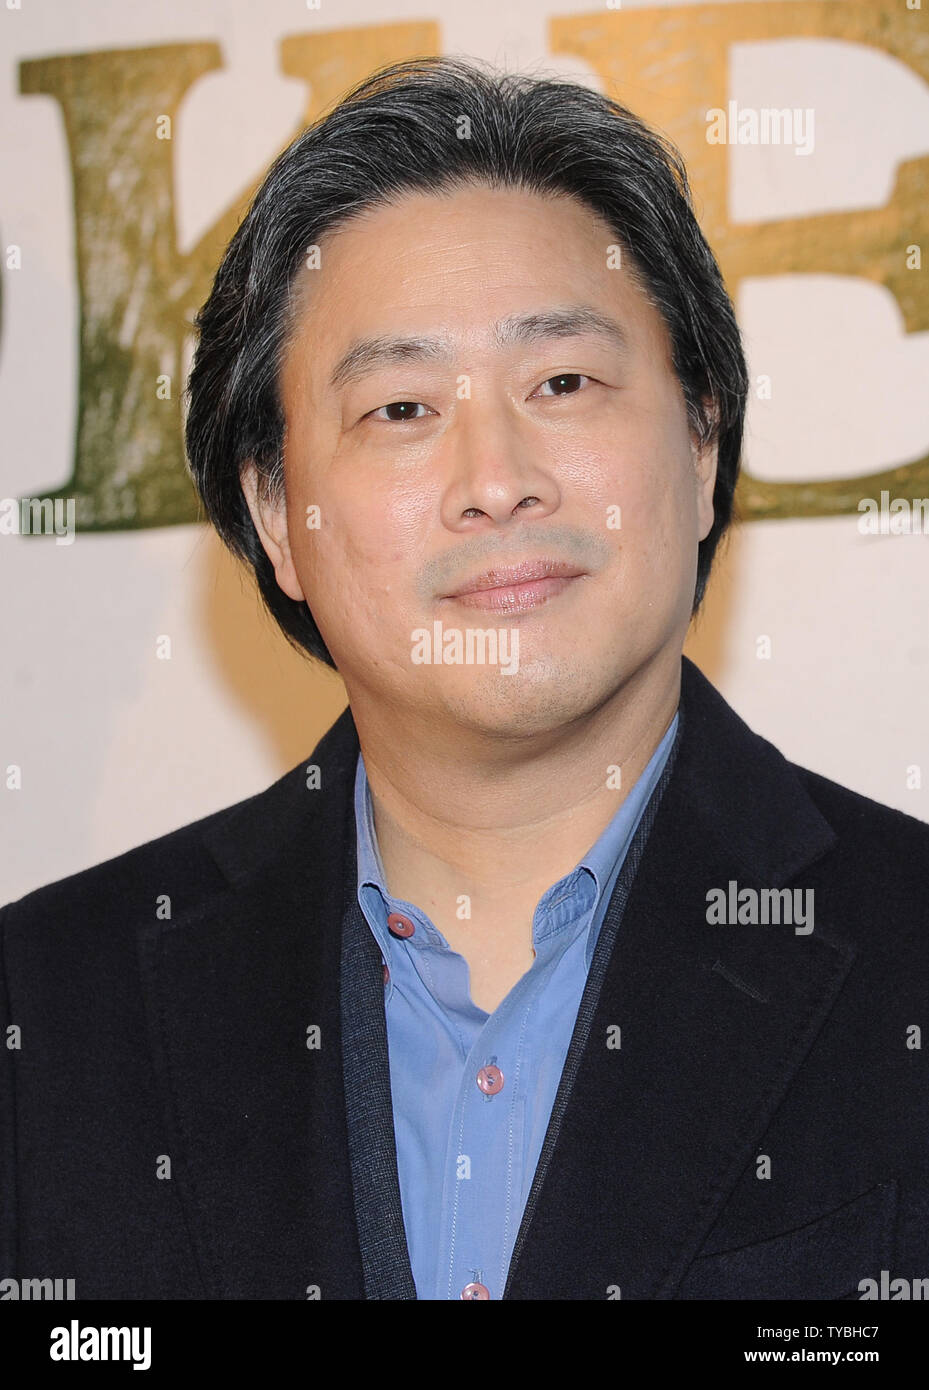 South Korean film director Park Chan-Wook attends a special screening of 'Stoker' at The Curzon Soho in London on February 17, 2013.     UPI/Paul Treadway Stock Photo